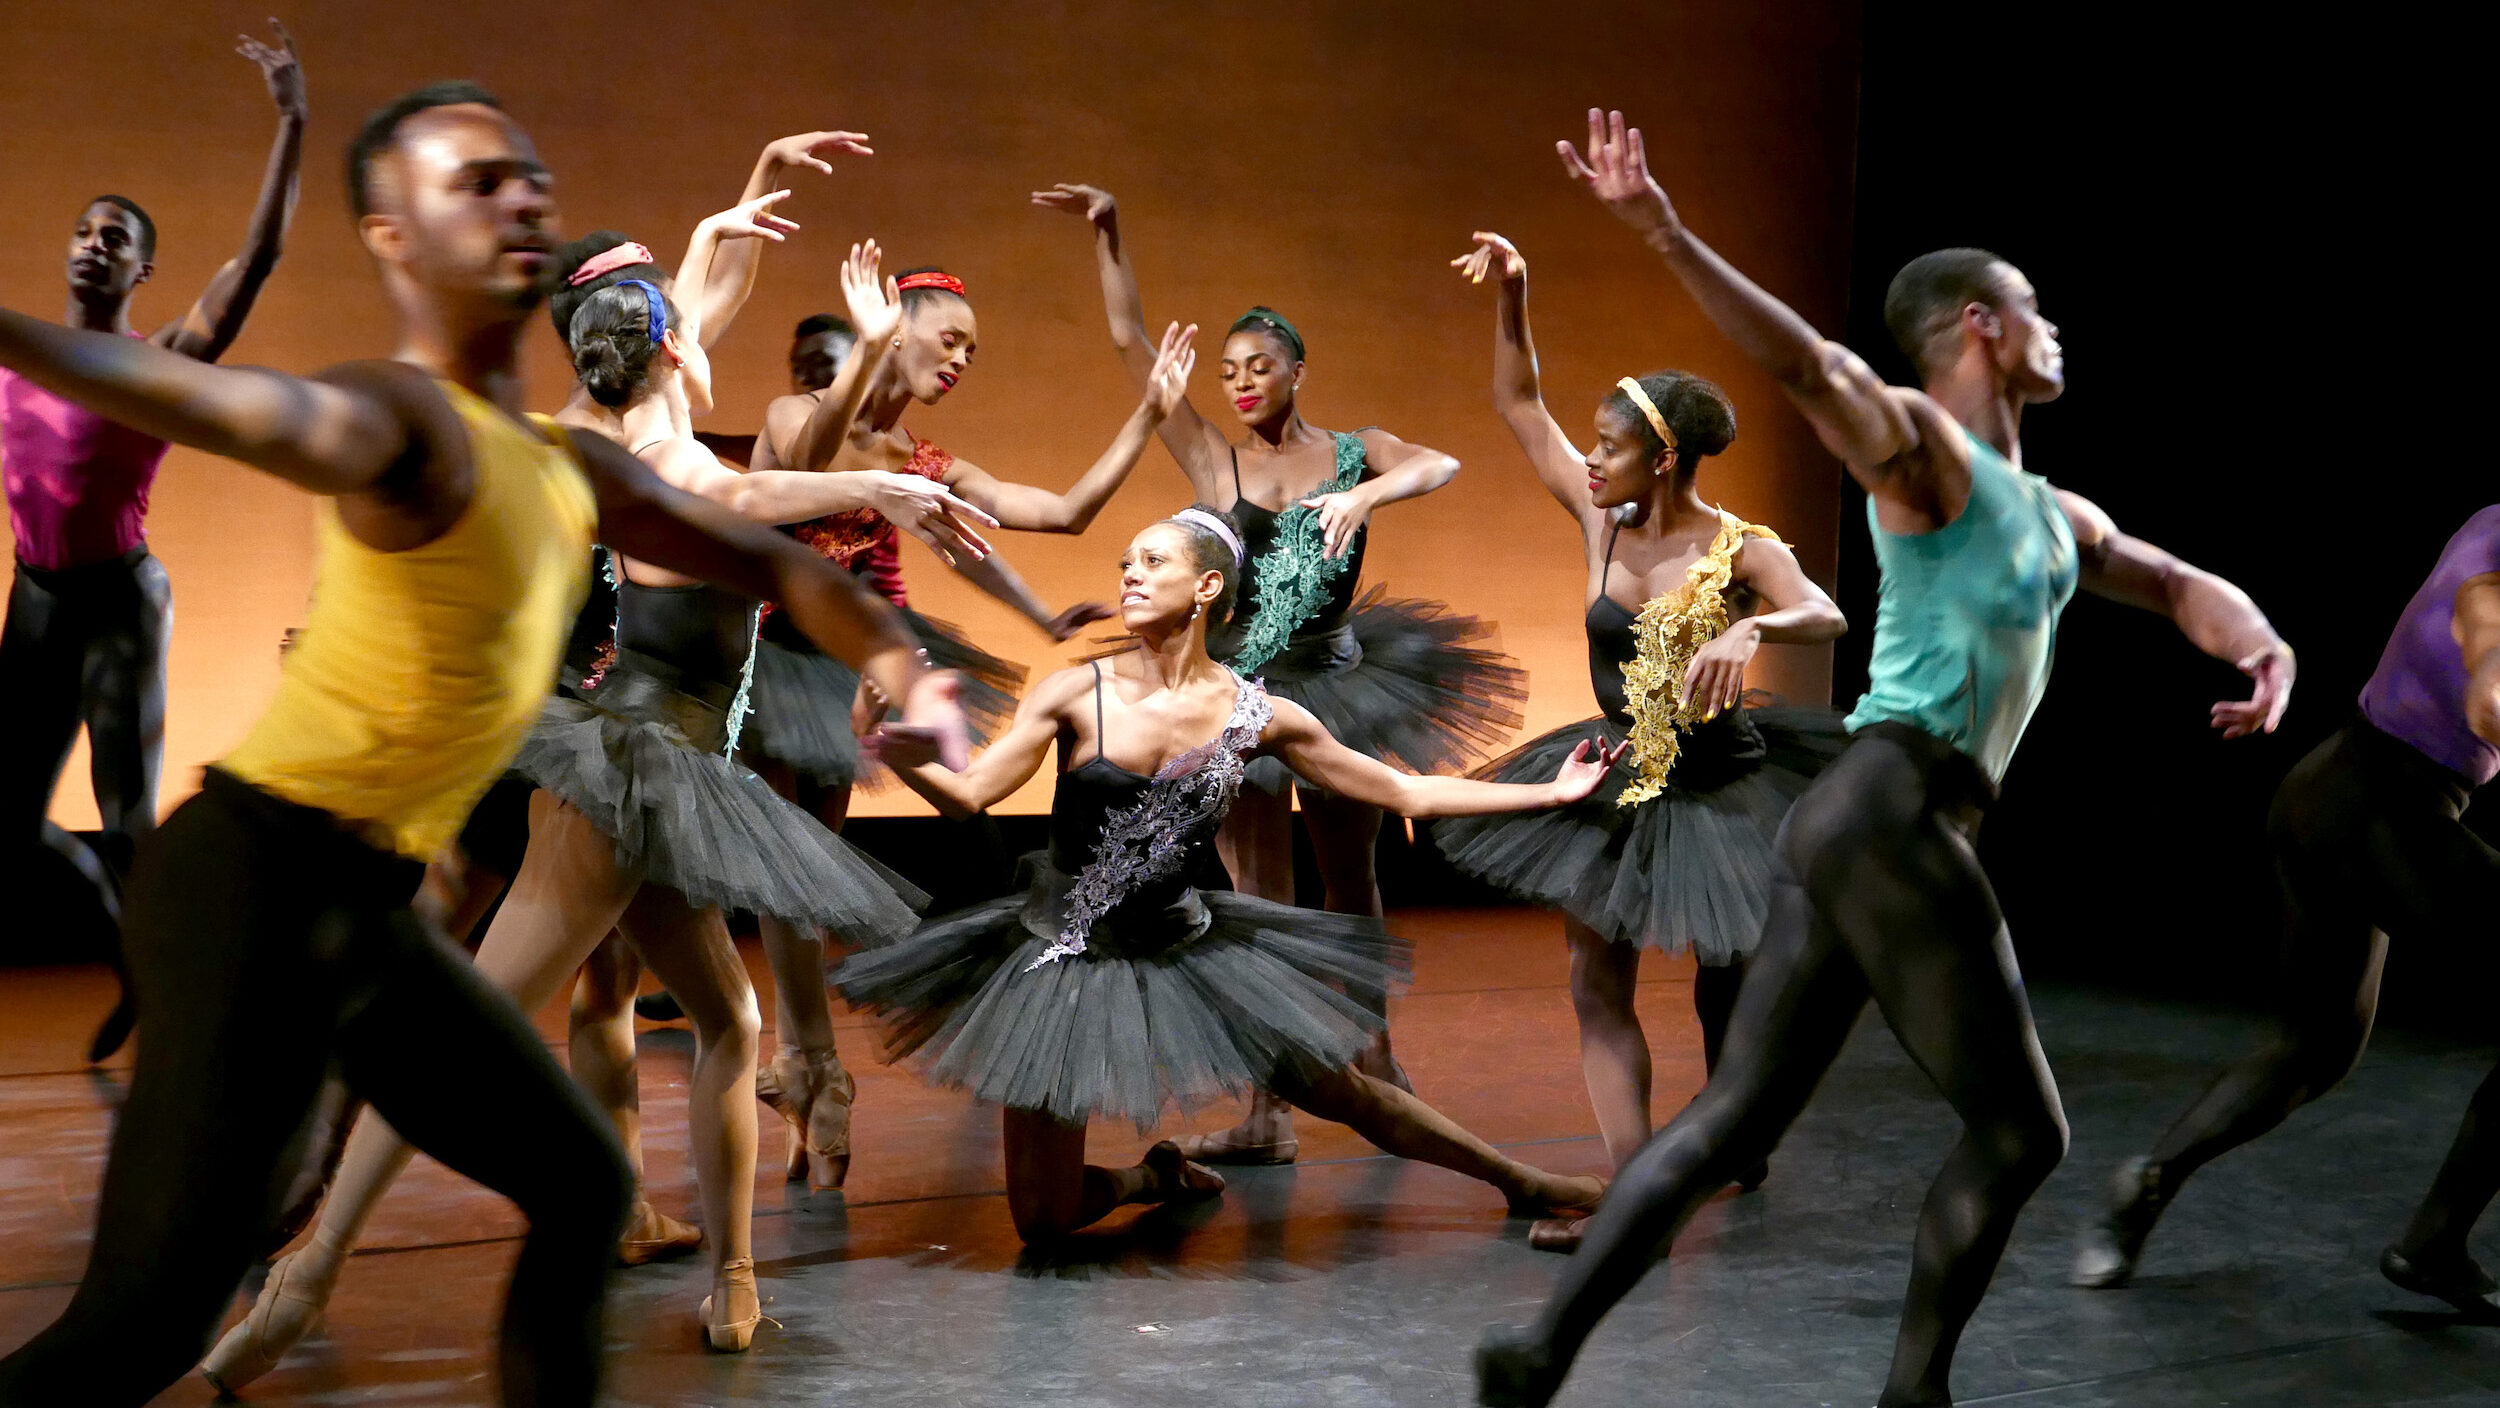 A ballerina in a black tutu kneels onstage onto her right knee and opens her arms, looking up at a group of other female ballet dancers who surround her in various poses. A group of male dancers in black tights and brightly colored sleeveless t-shirts run in a large circle around them.